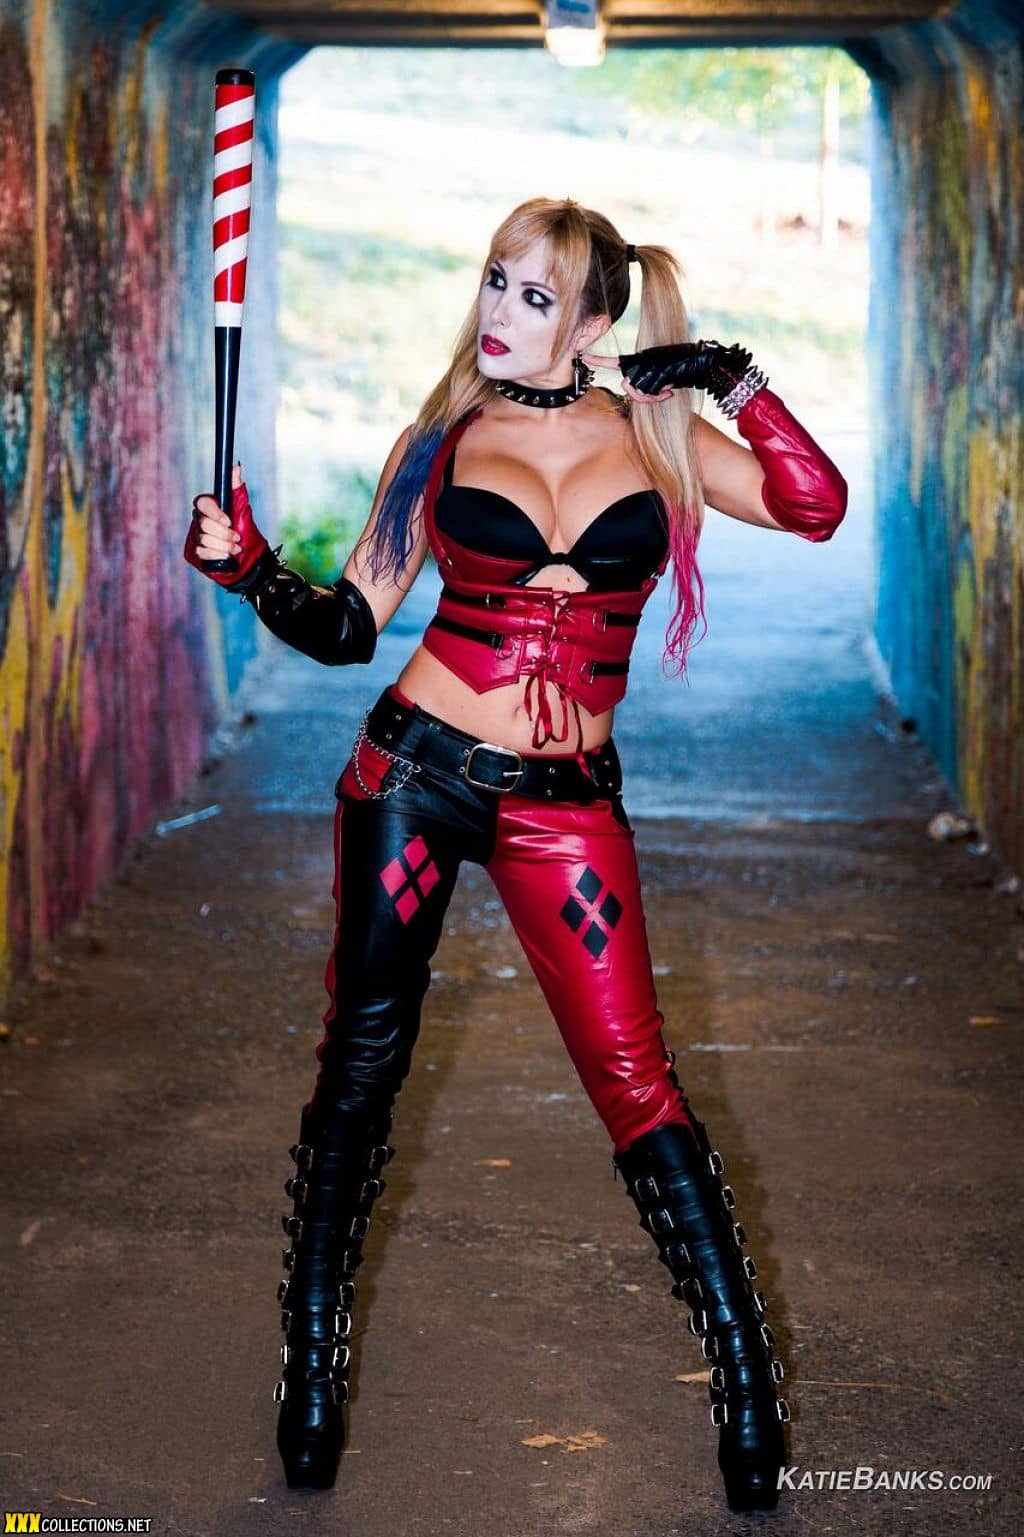 The art of cosplaying by the geeky gamer girl